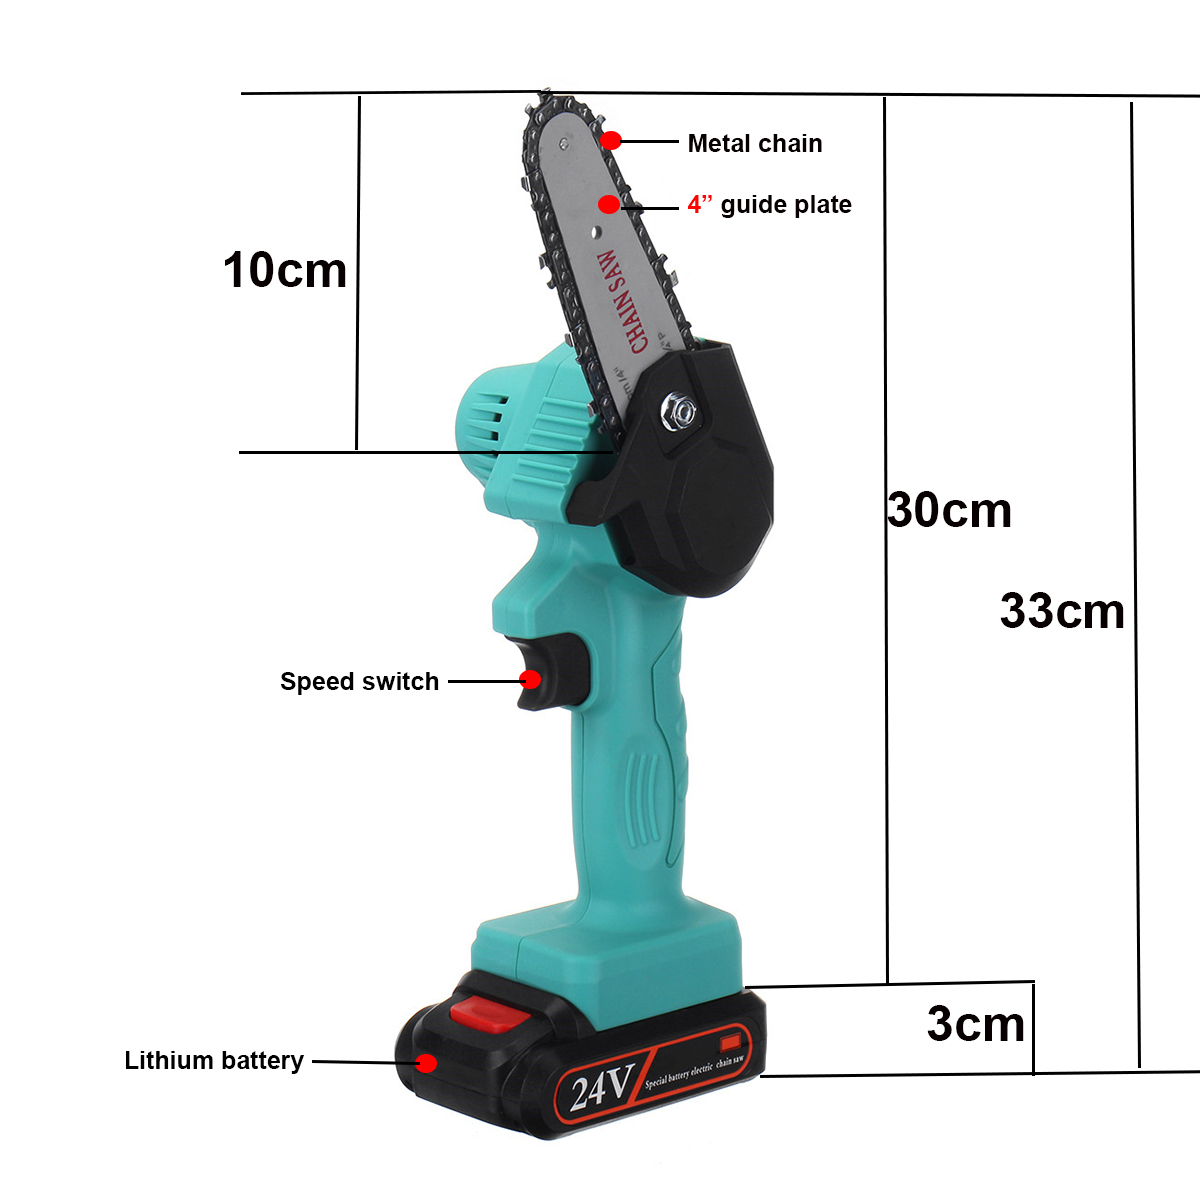 21V-Rechargeable-Portable-Electric-Saws-Household-Woodworking-Chainsaw-Garden-Mini-Electric-Chain-Sa-1764820-3